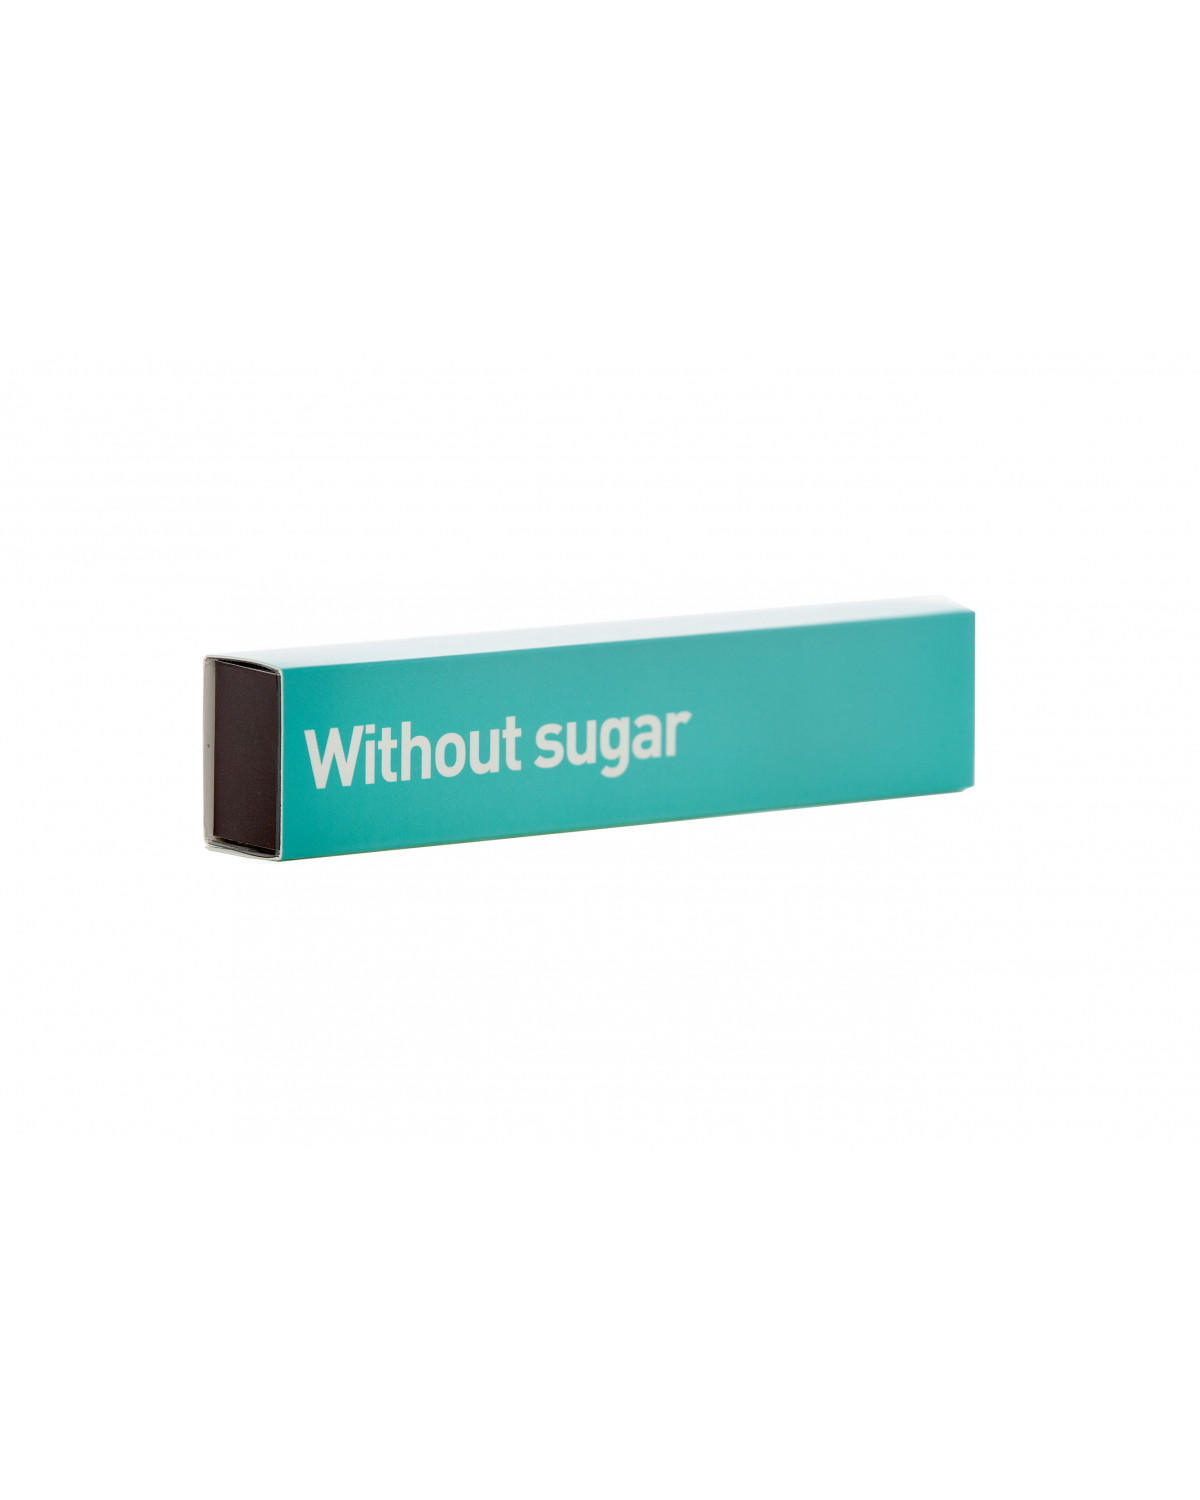 Without sugar assortment